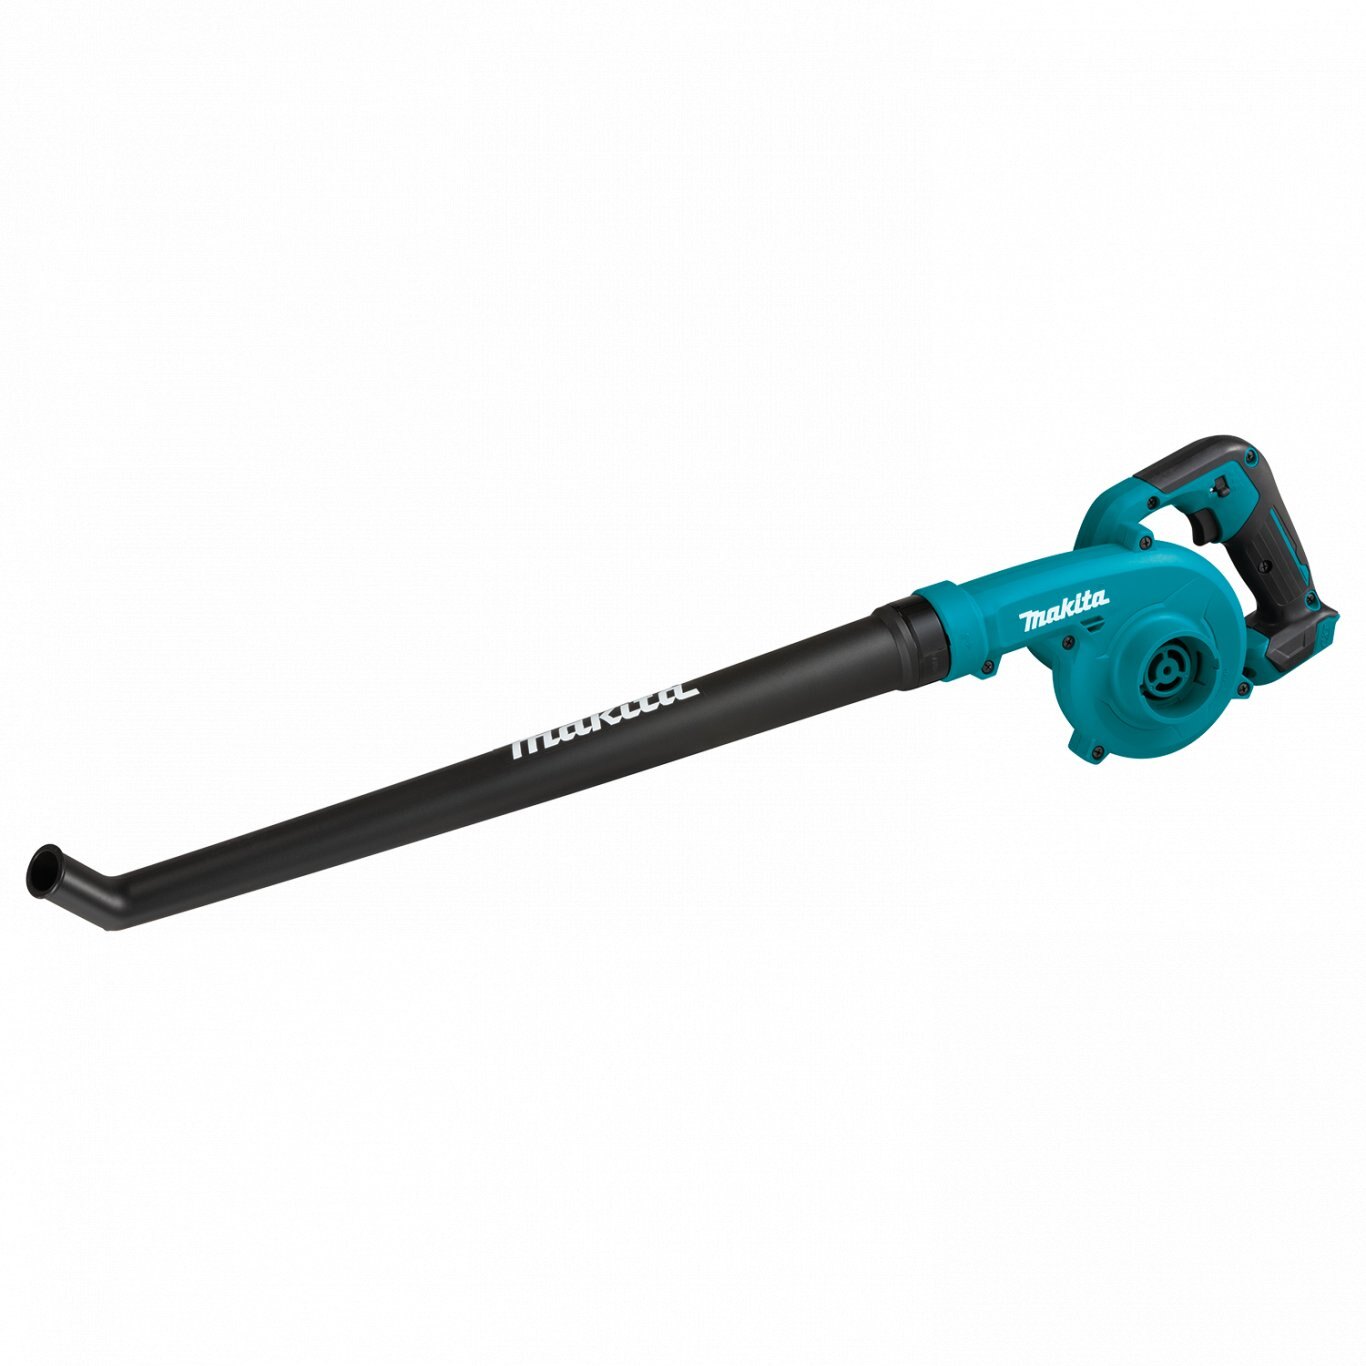 Makita 12V max CXT® Lithium?Ion Cordless Floor Blower, Tool Only